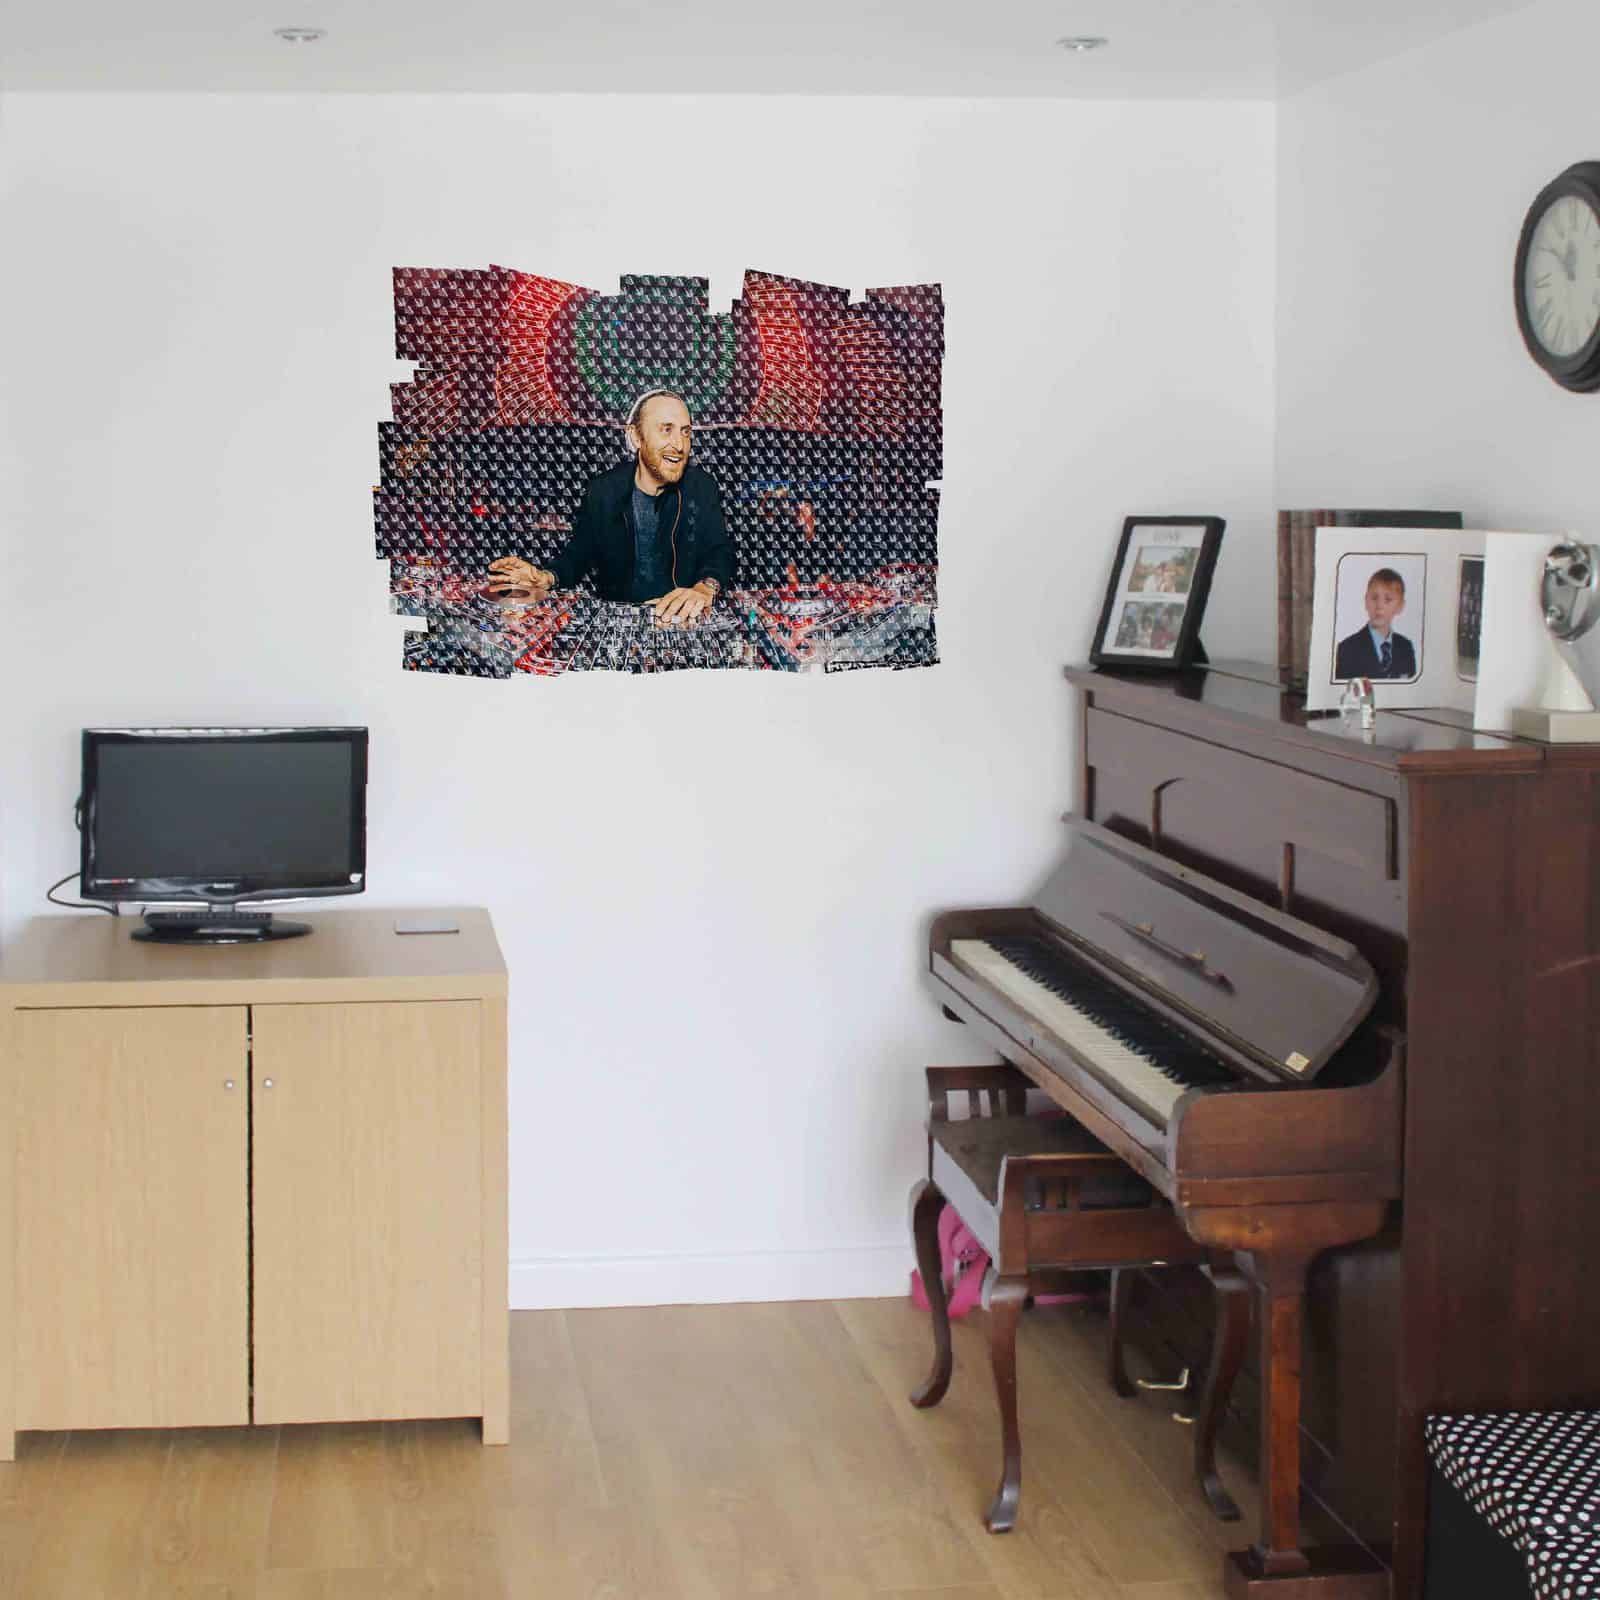 Print your own music band wall sticker